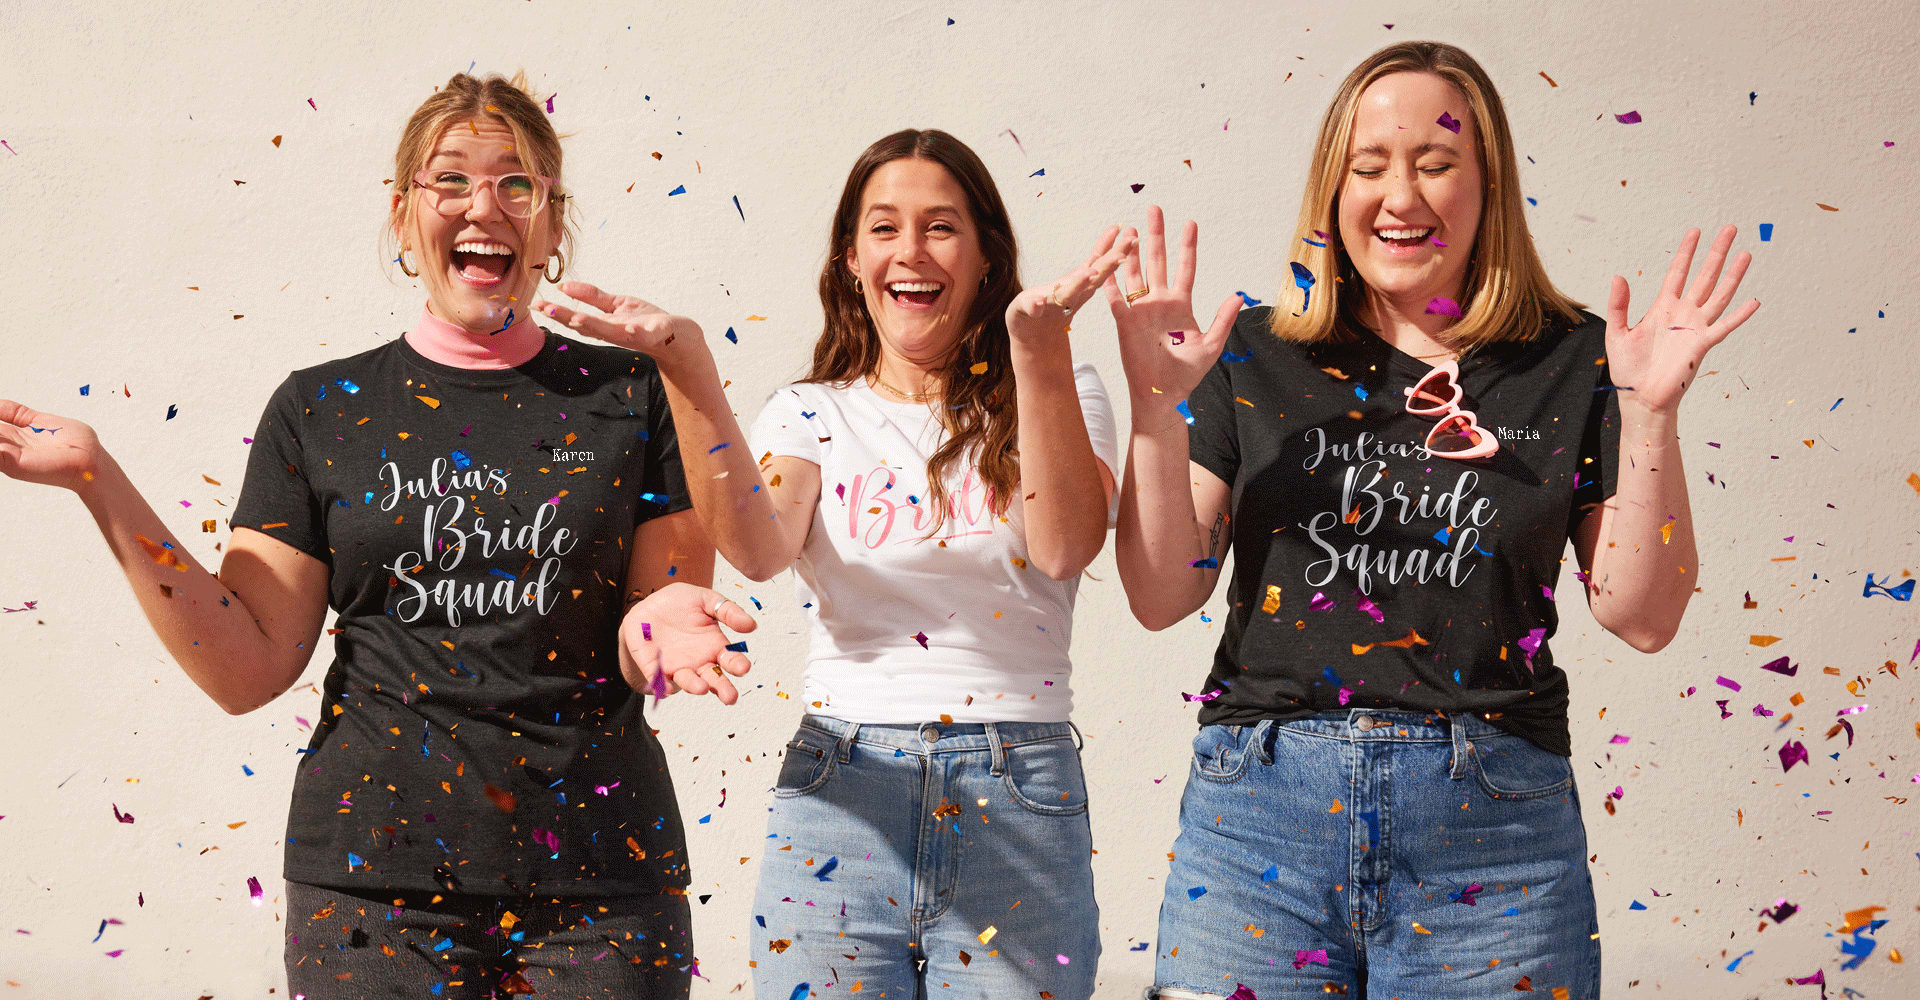 Overjoyed young girls wearing matching Fruit Of The Loom® slim-fit women's T-shirts and having fun with colourful confetti, celebrating at a wedding party.